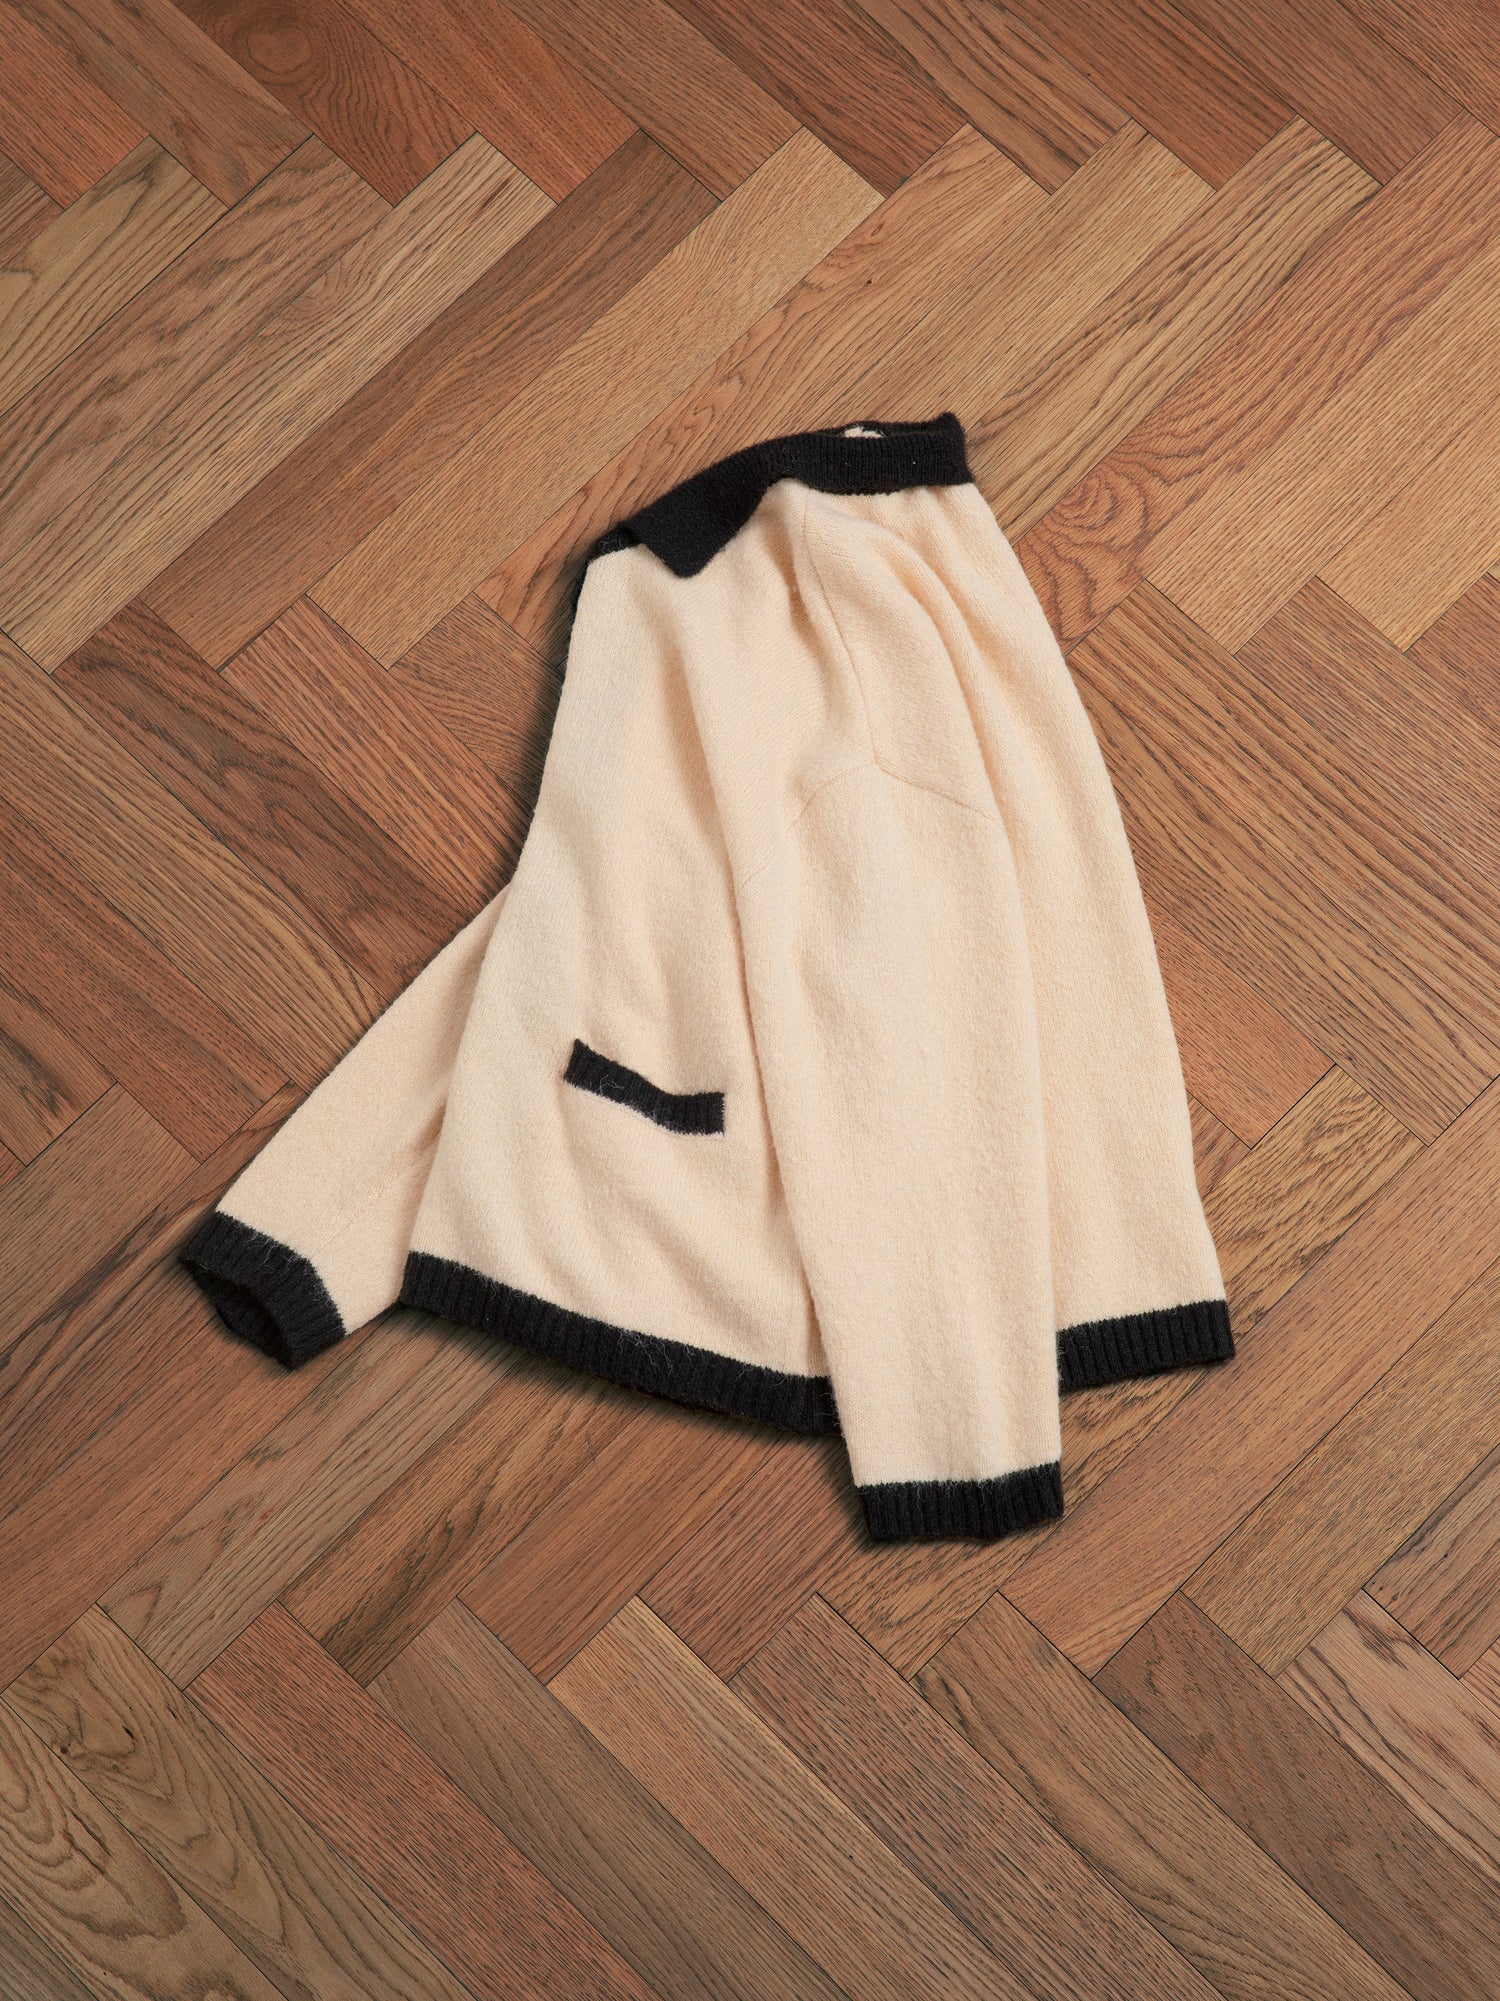 A luxurious Sima Contrast Collar Knitted Cardigan sweater with wooden buttons on a wooden floor.